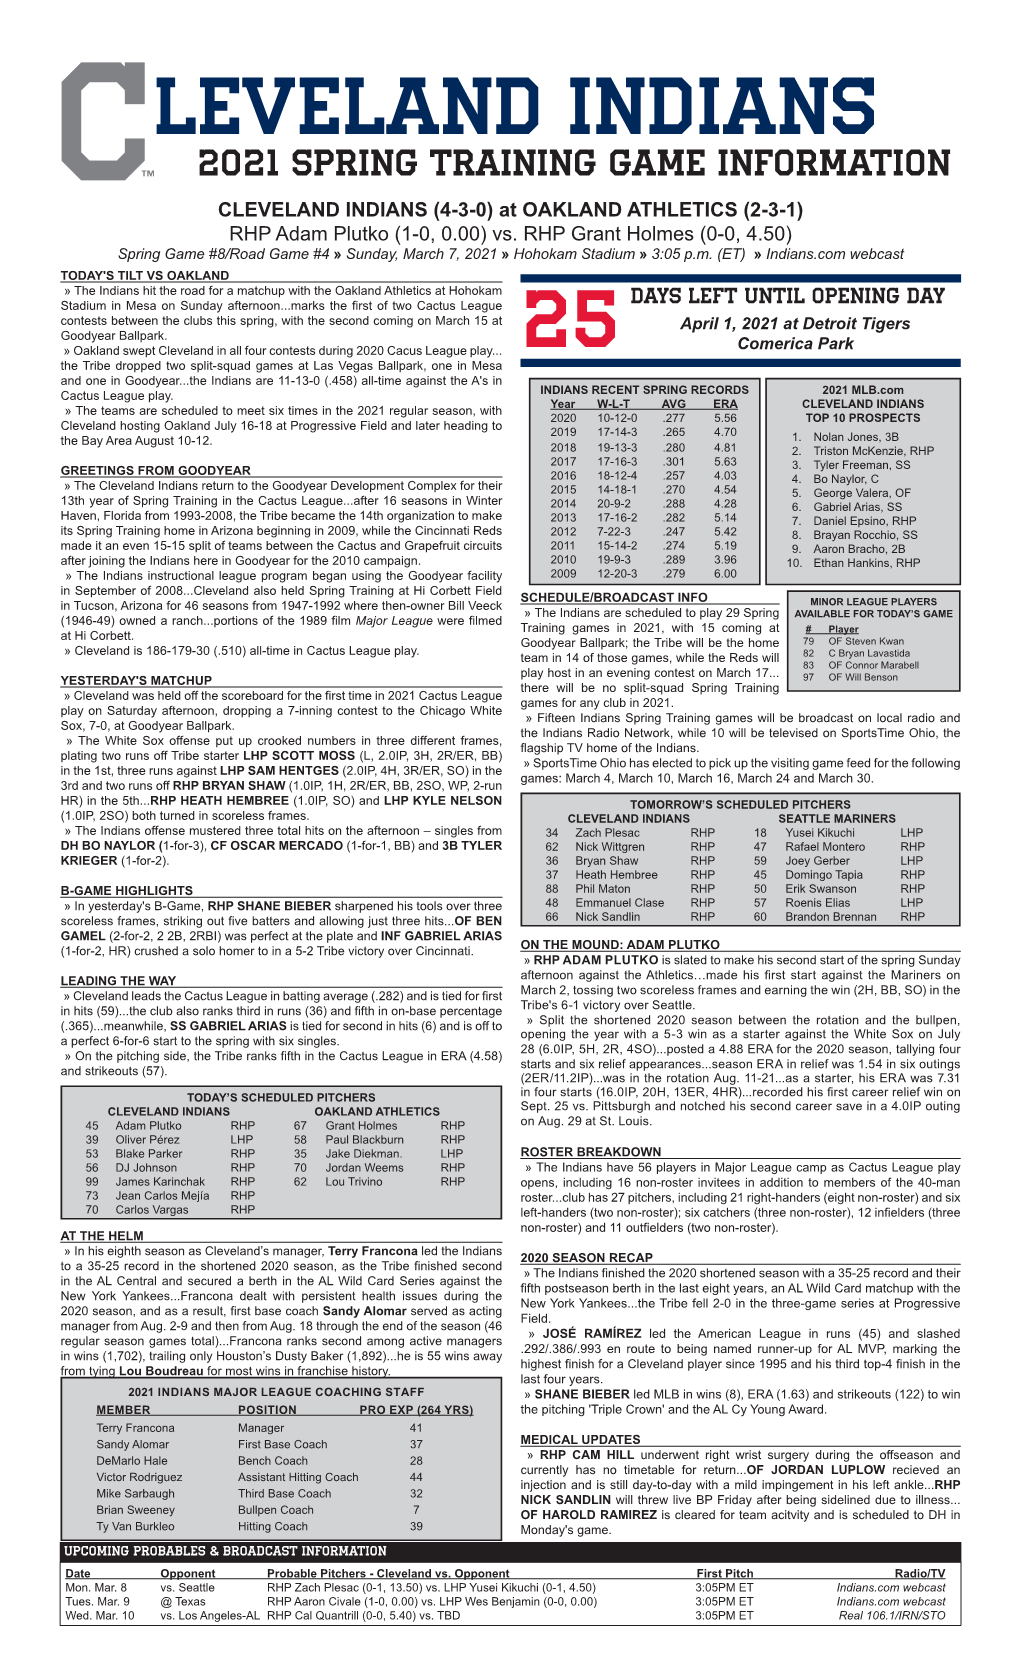 03-07-2021 Indians Game Notes